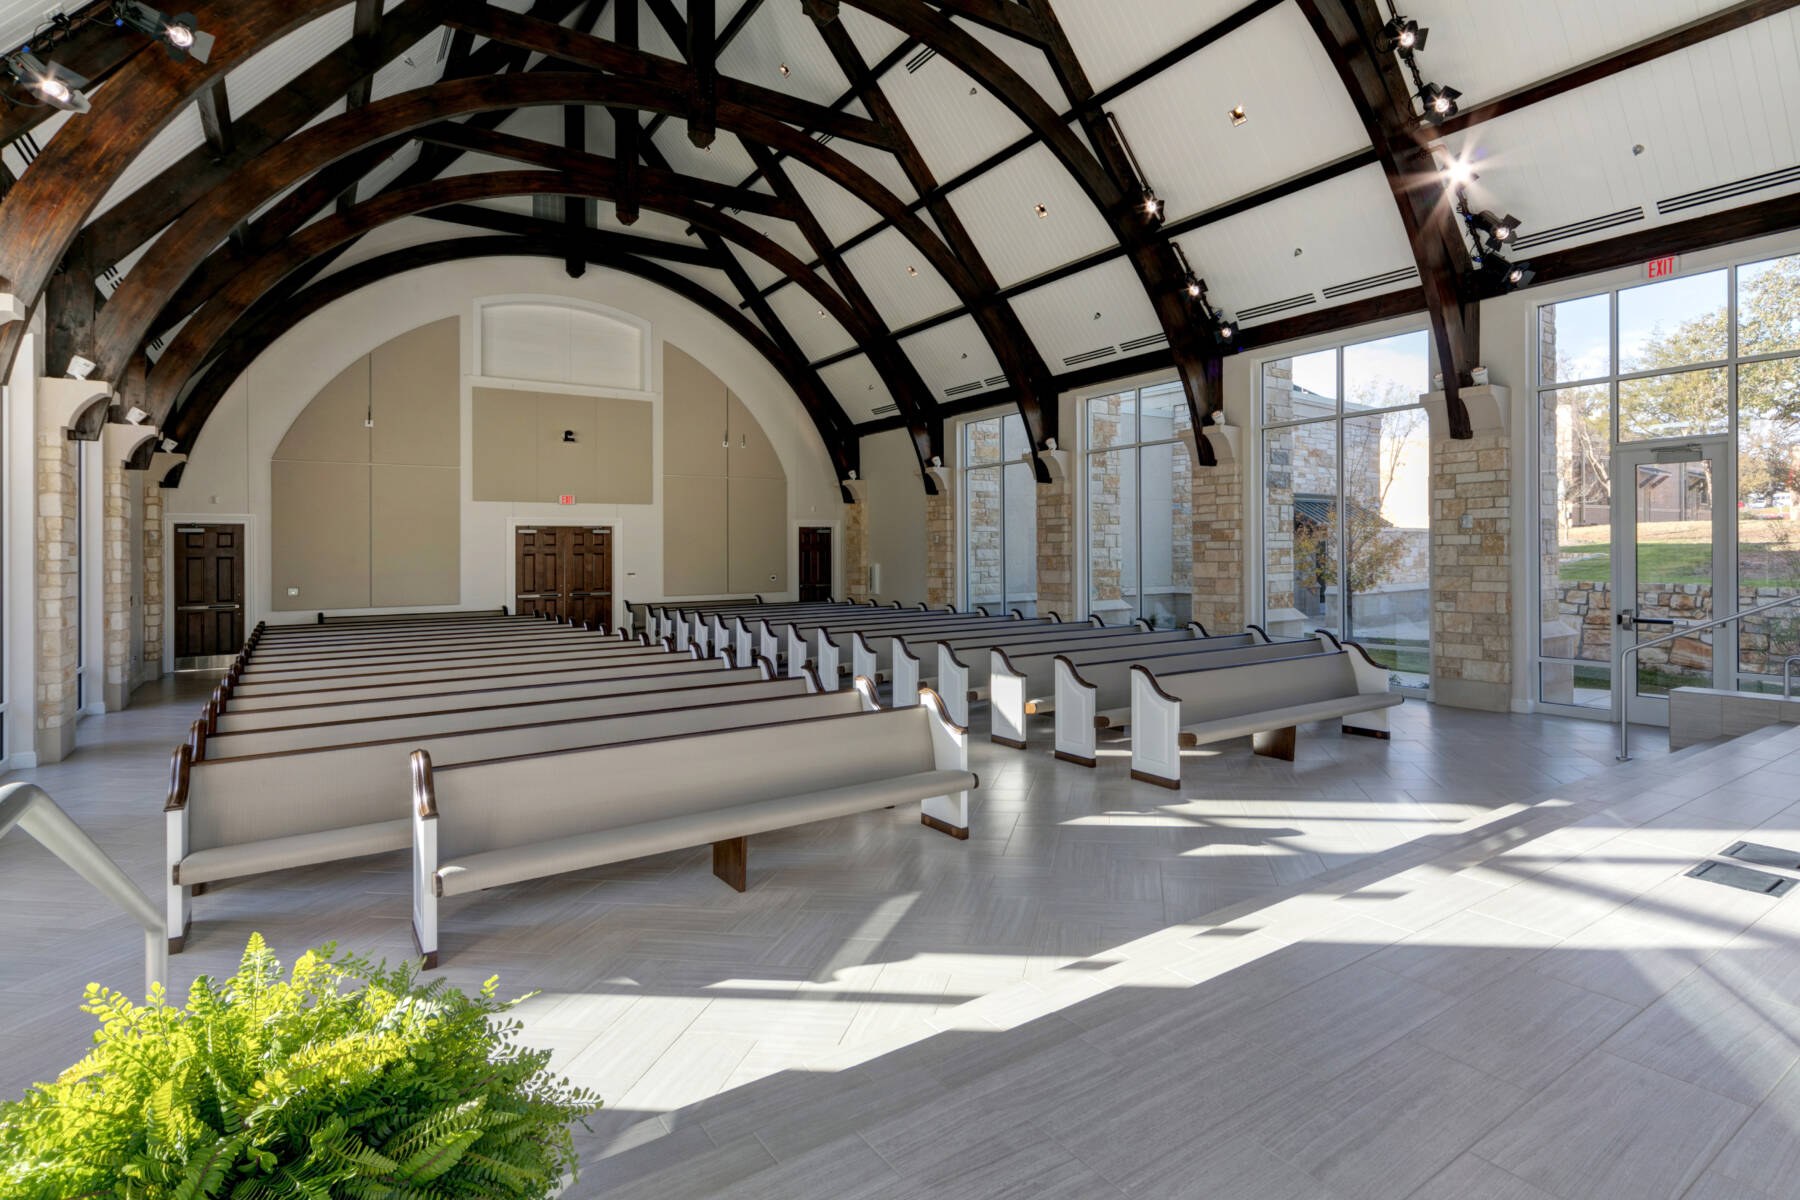 Interior shot of chapel seating and flooring at The Bowden Events Center.